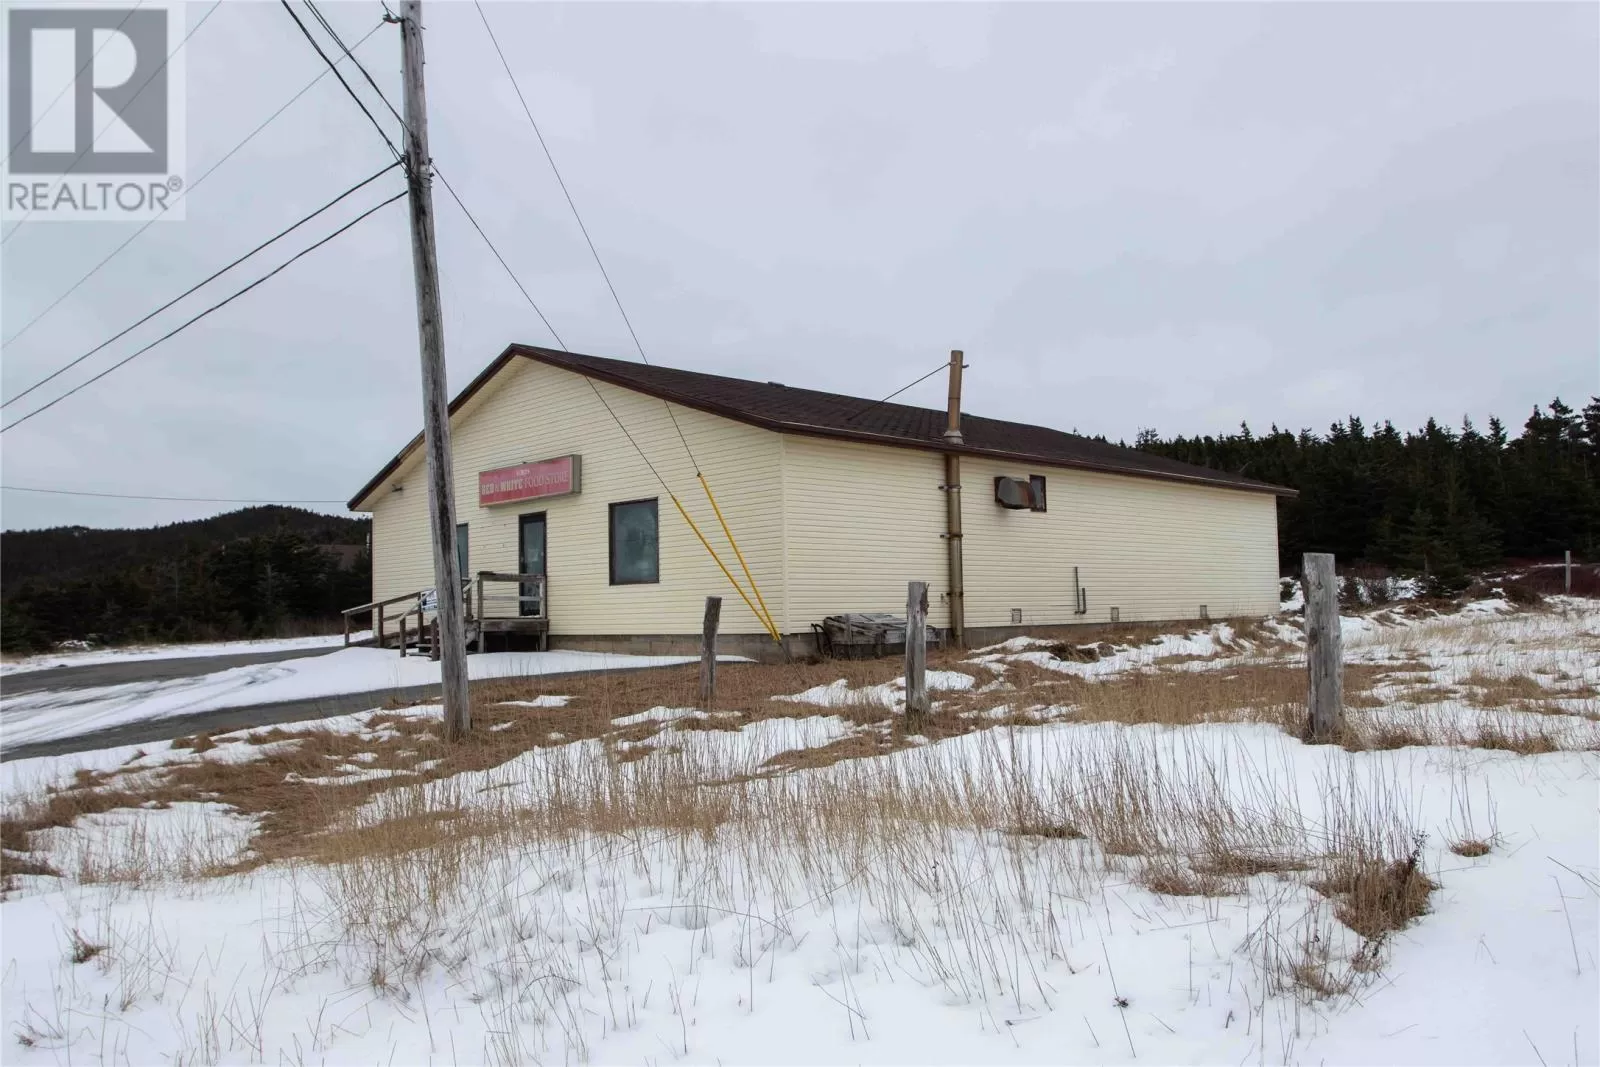 Retail for rent: 0 Main  Route 235 Highway, Newman's Cove, Newfoundland & Labrador A0C 2A0